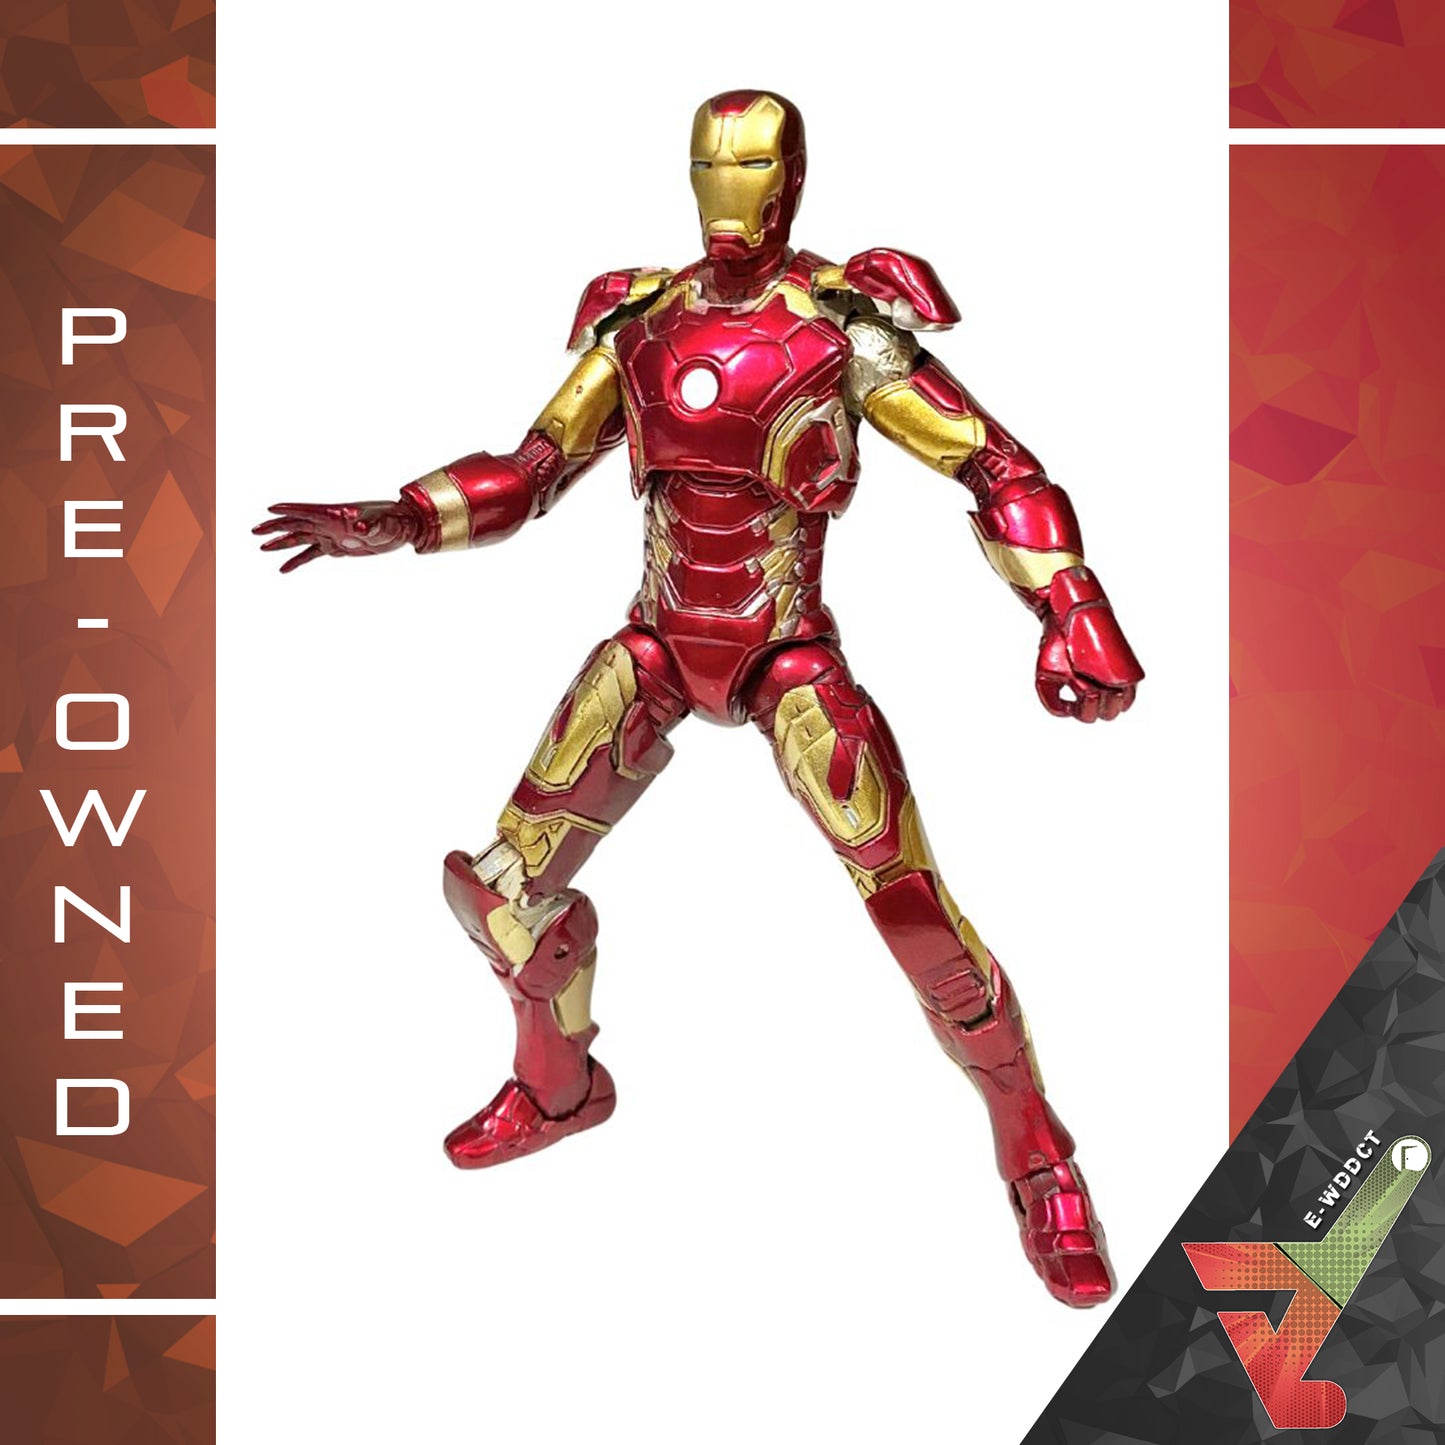 Iron Man (7 Inch Highly Articulated) Action Figure With Accessories.